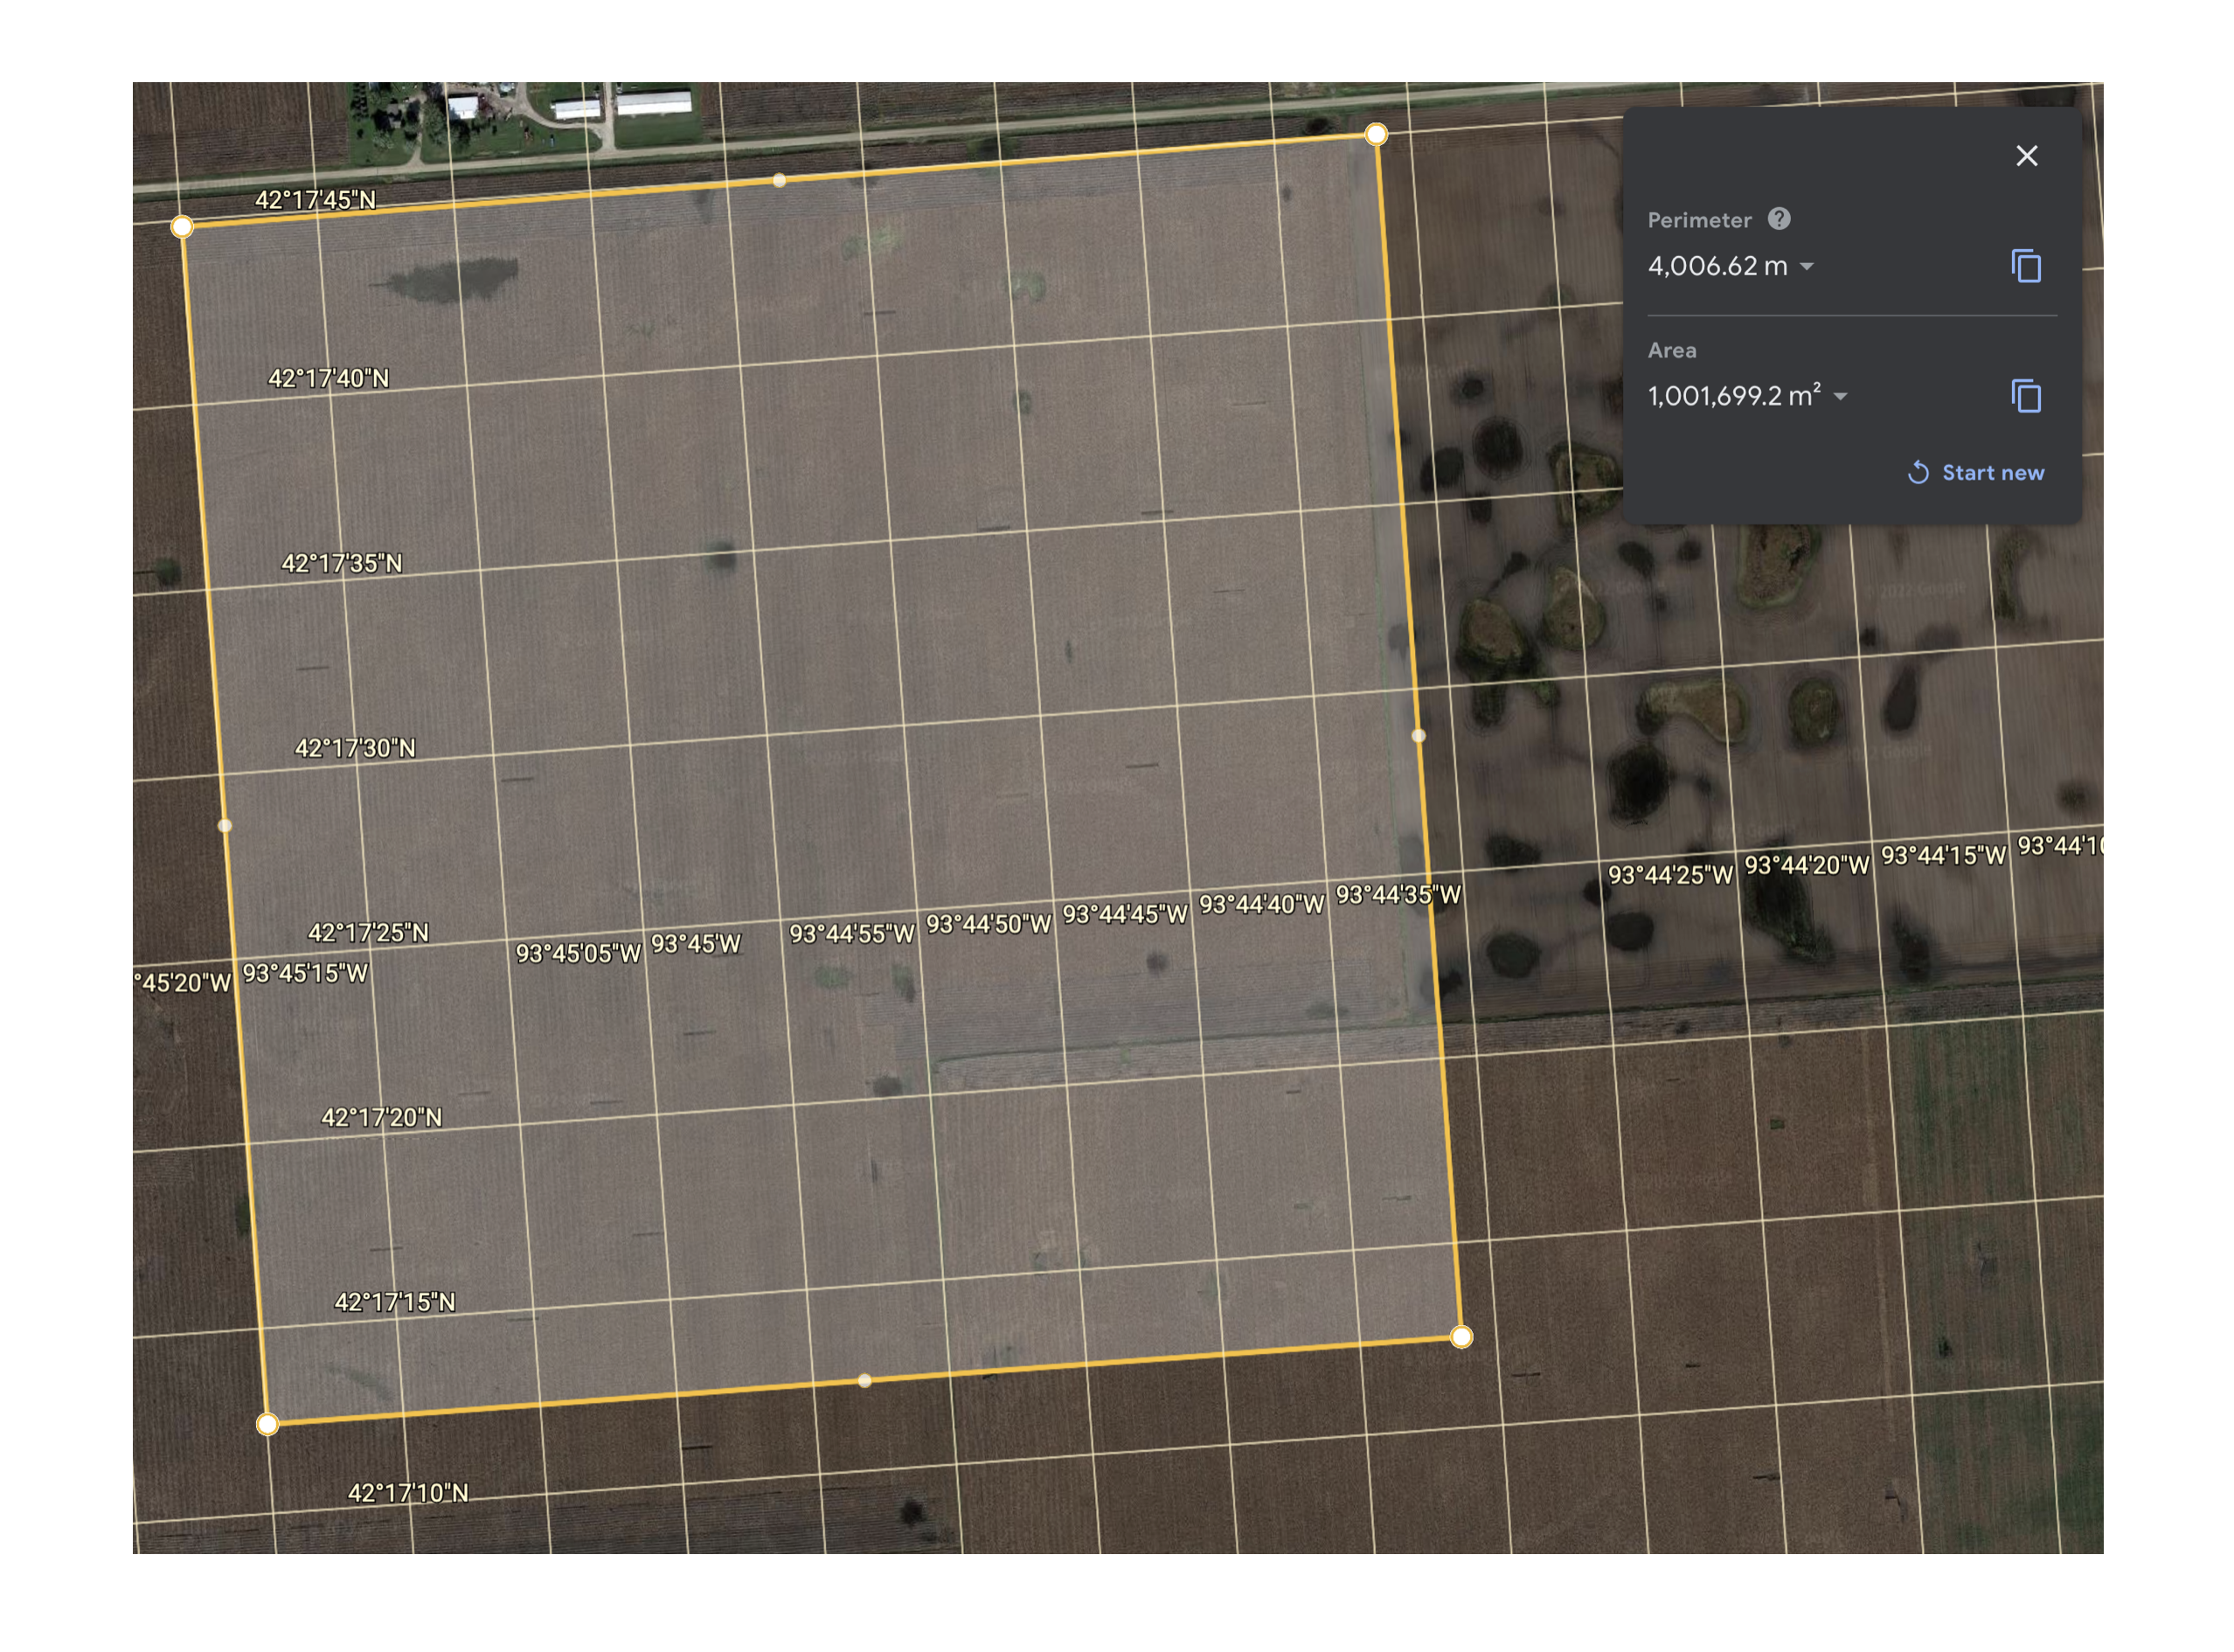 Measurements from Google Earth: Using the available (but likely imprecise measurement tools of Google Earth) the area of this \(1km \times 1km\) square at latitude \(\phi=0.83^{R}\) is approximately \(1km^{2}+1,700m^{2}\) which is clearly greater than \(1km^{2}\). The extra area is due to the curvature of the Earth.